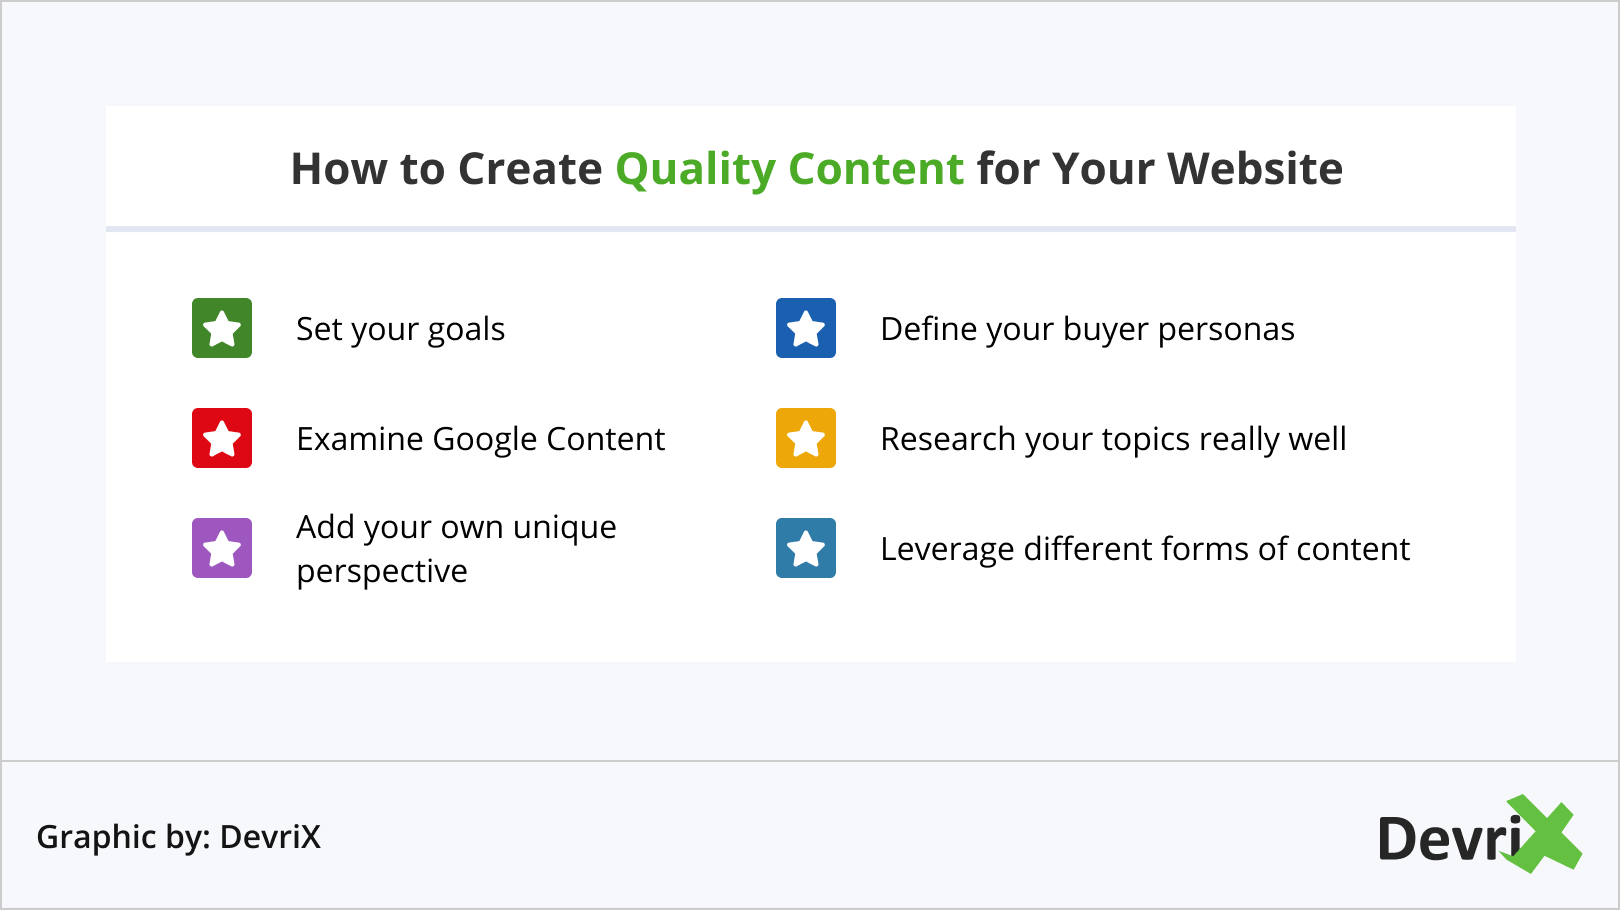 How to Create Quality Content for Your Website